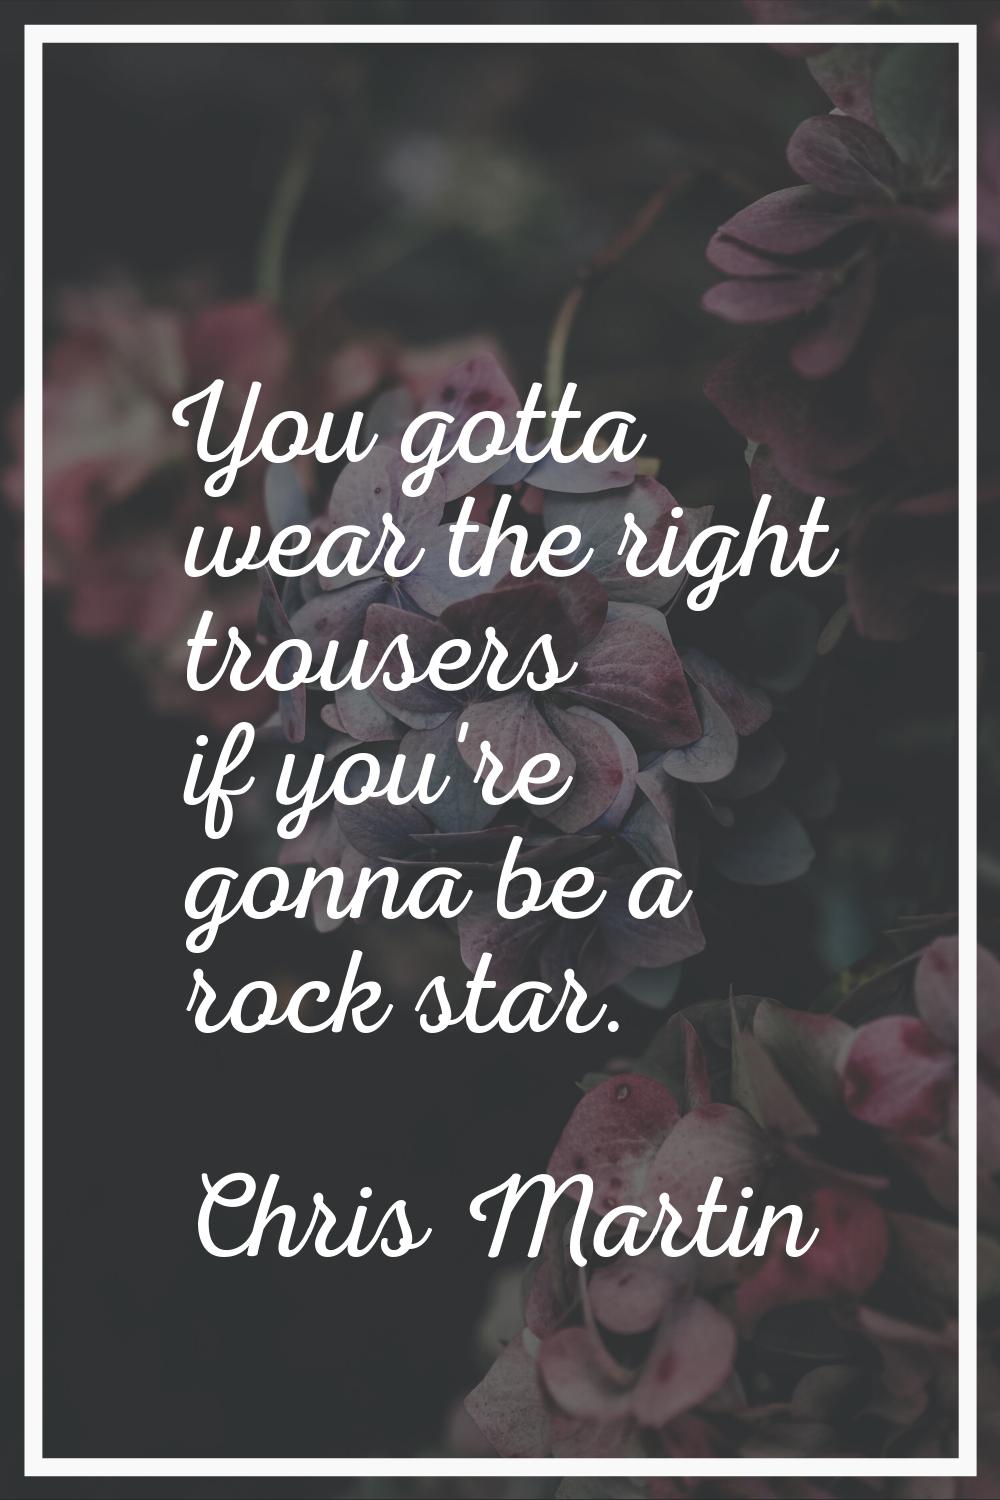 You gotta wear the right trousers if you're gonna be a rock star.